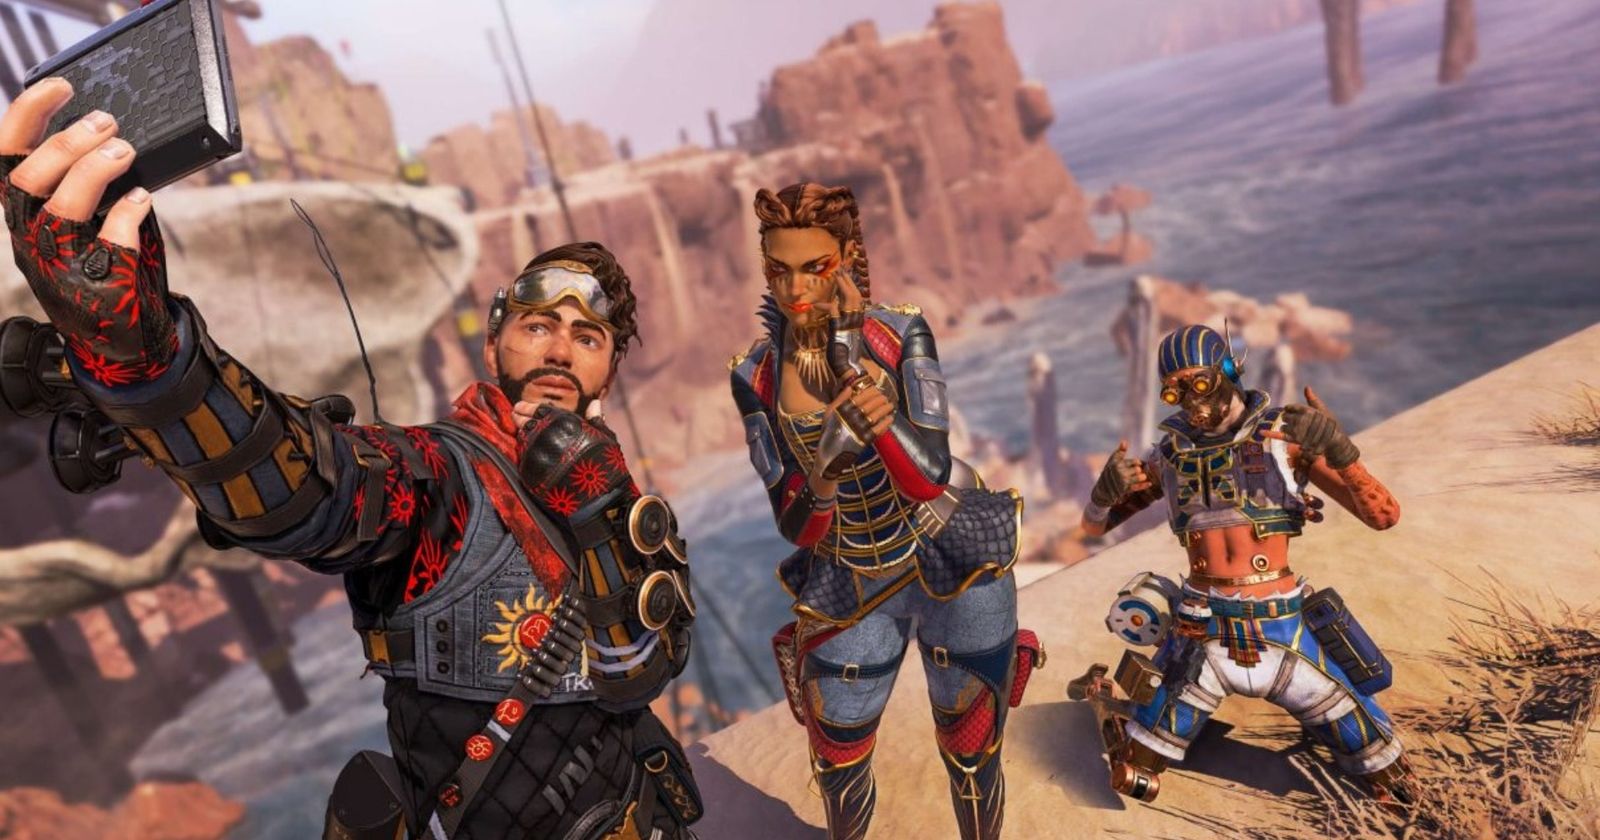 Apex Legends Cross-Progression: Tech Not Built With It in Mind